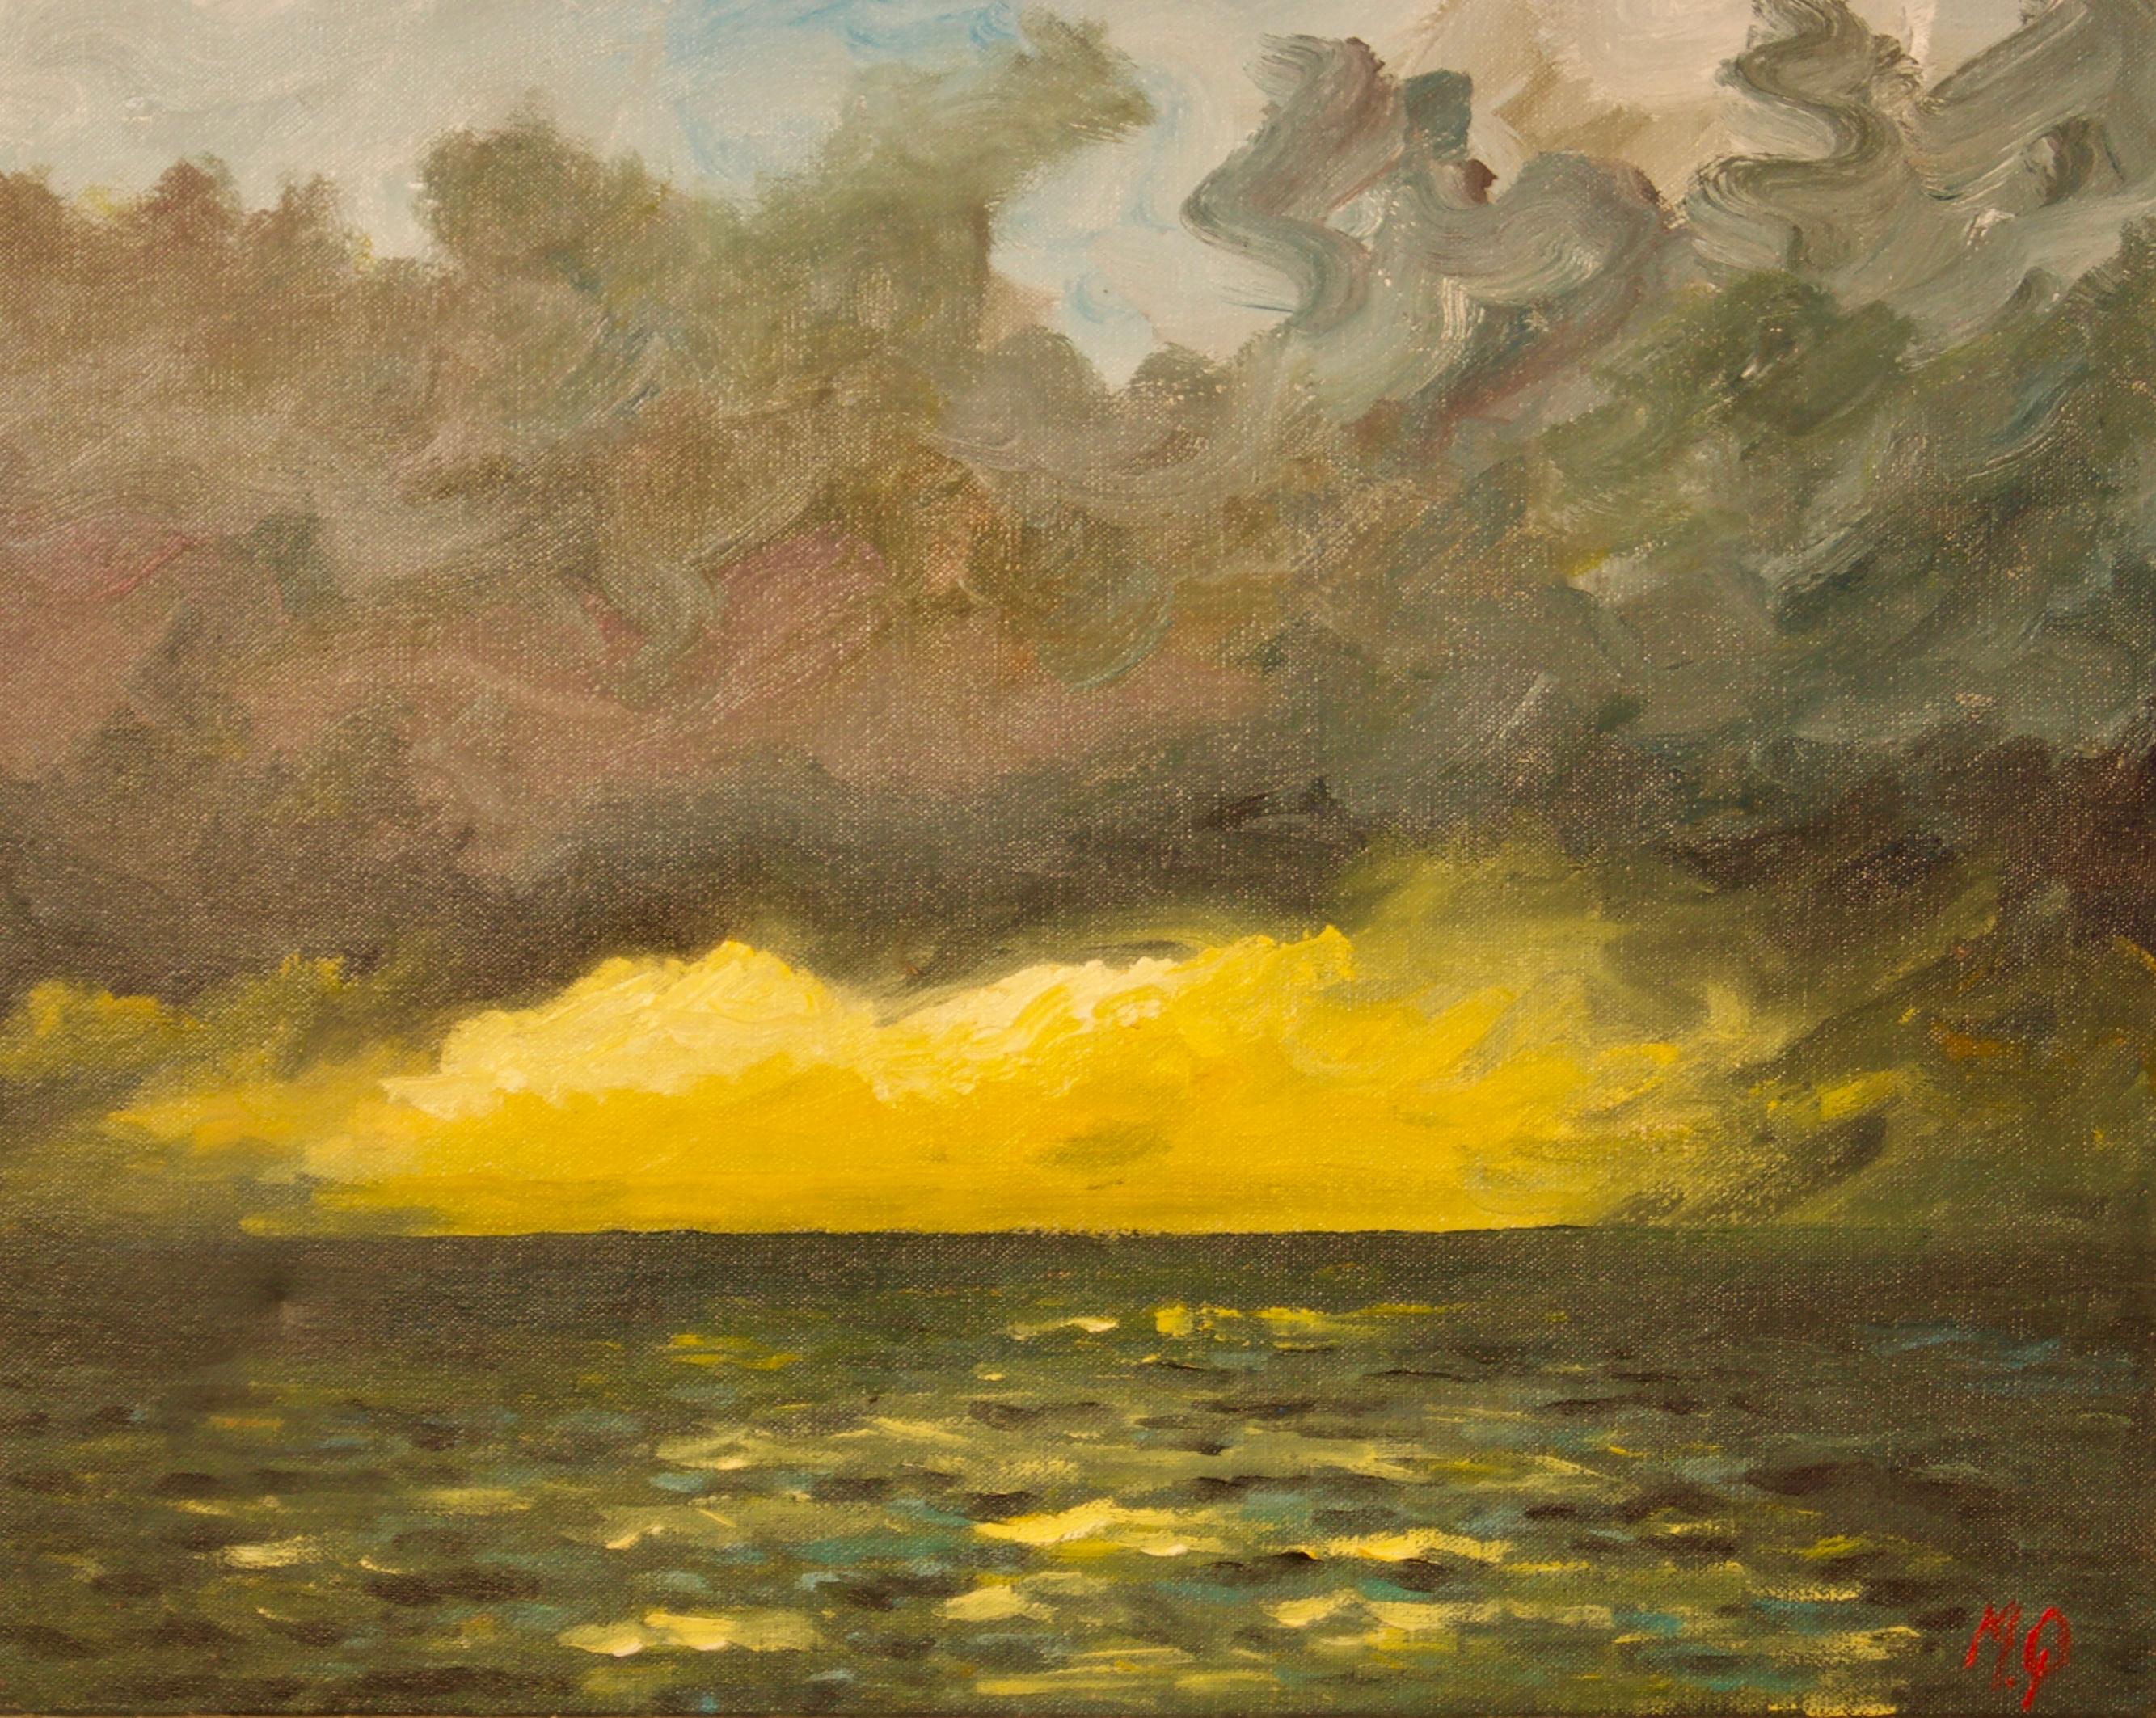 Michael Quirke Landscape Painting - St Ives - Late 20th Century Impressionist Acrylic of Sunset on the Sea by Quirke